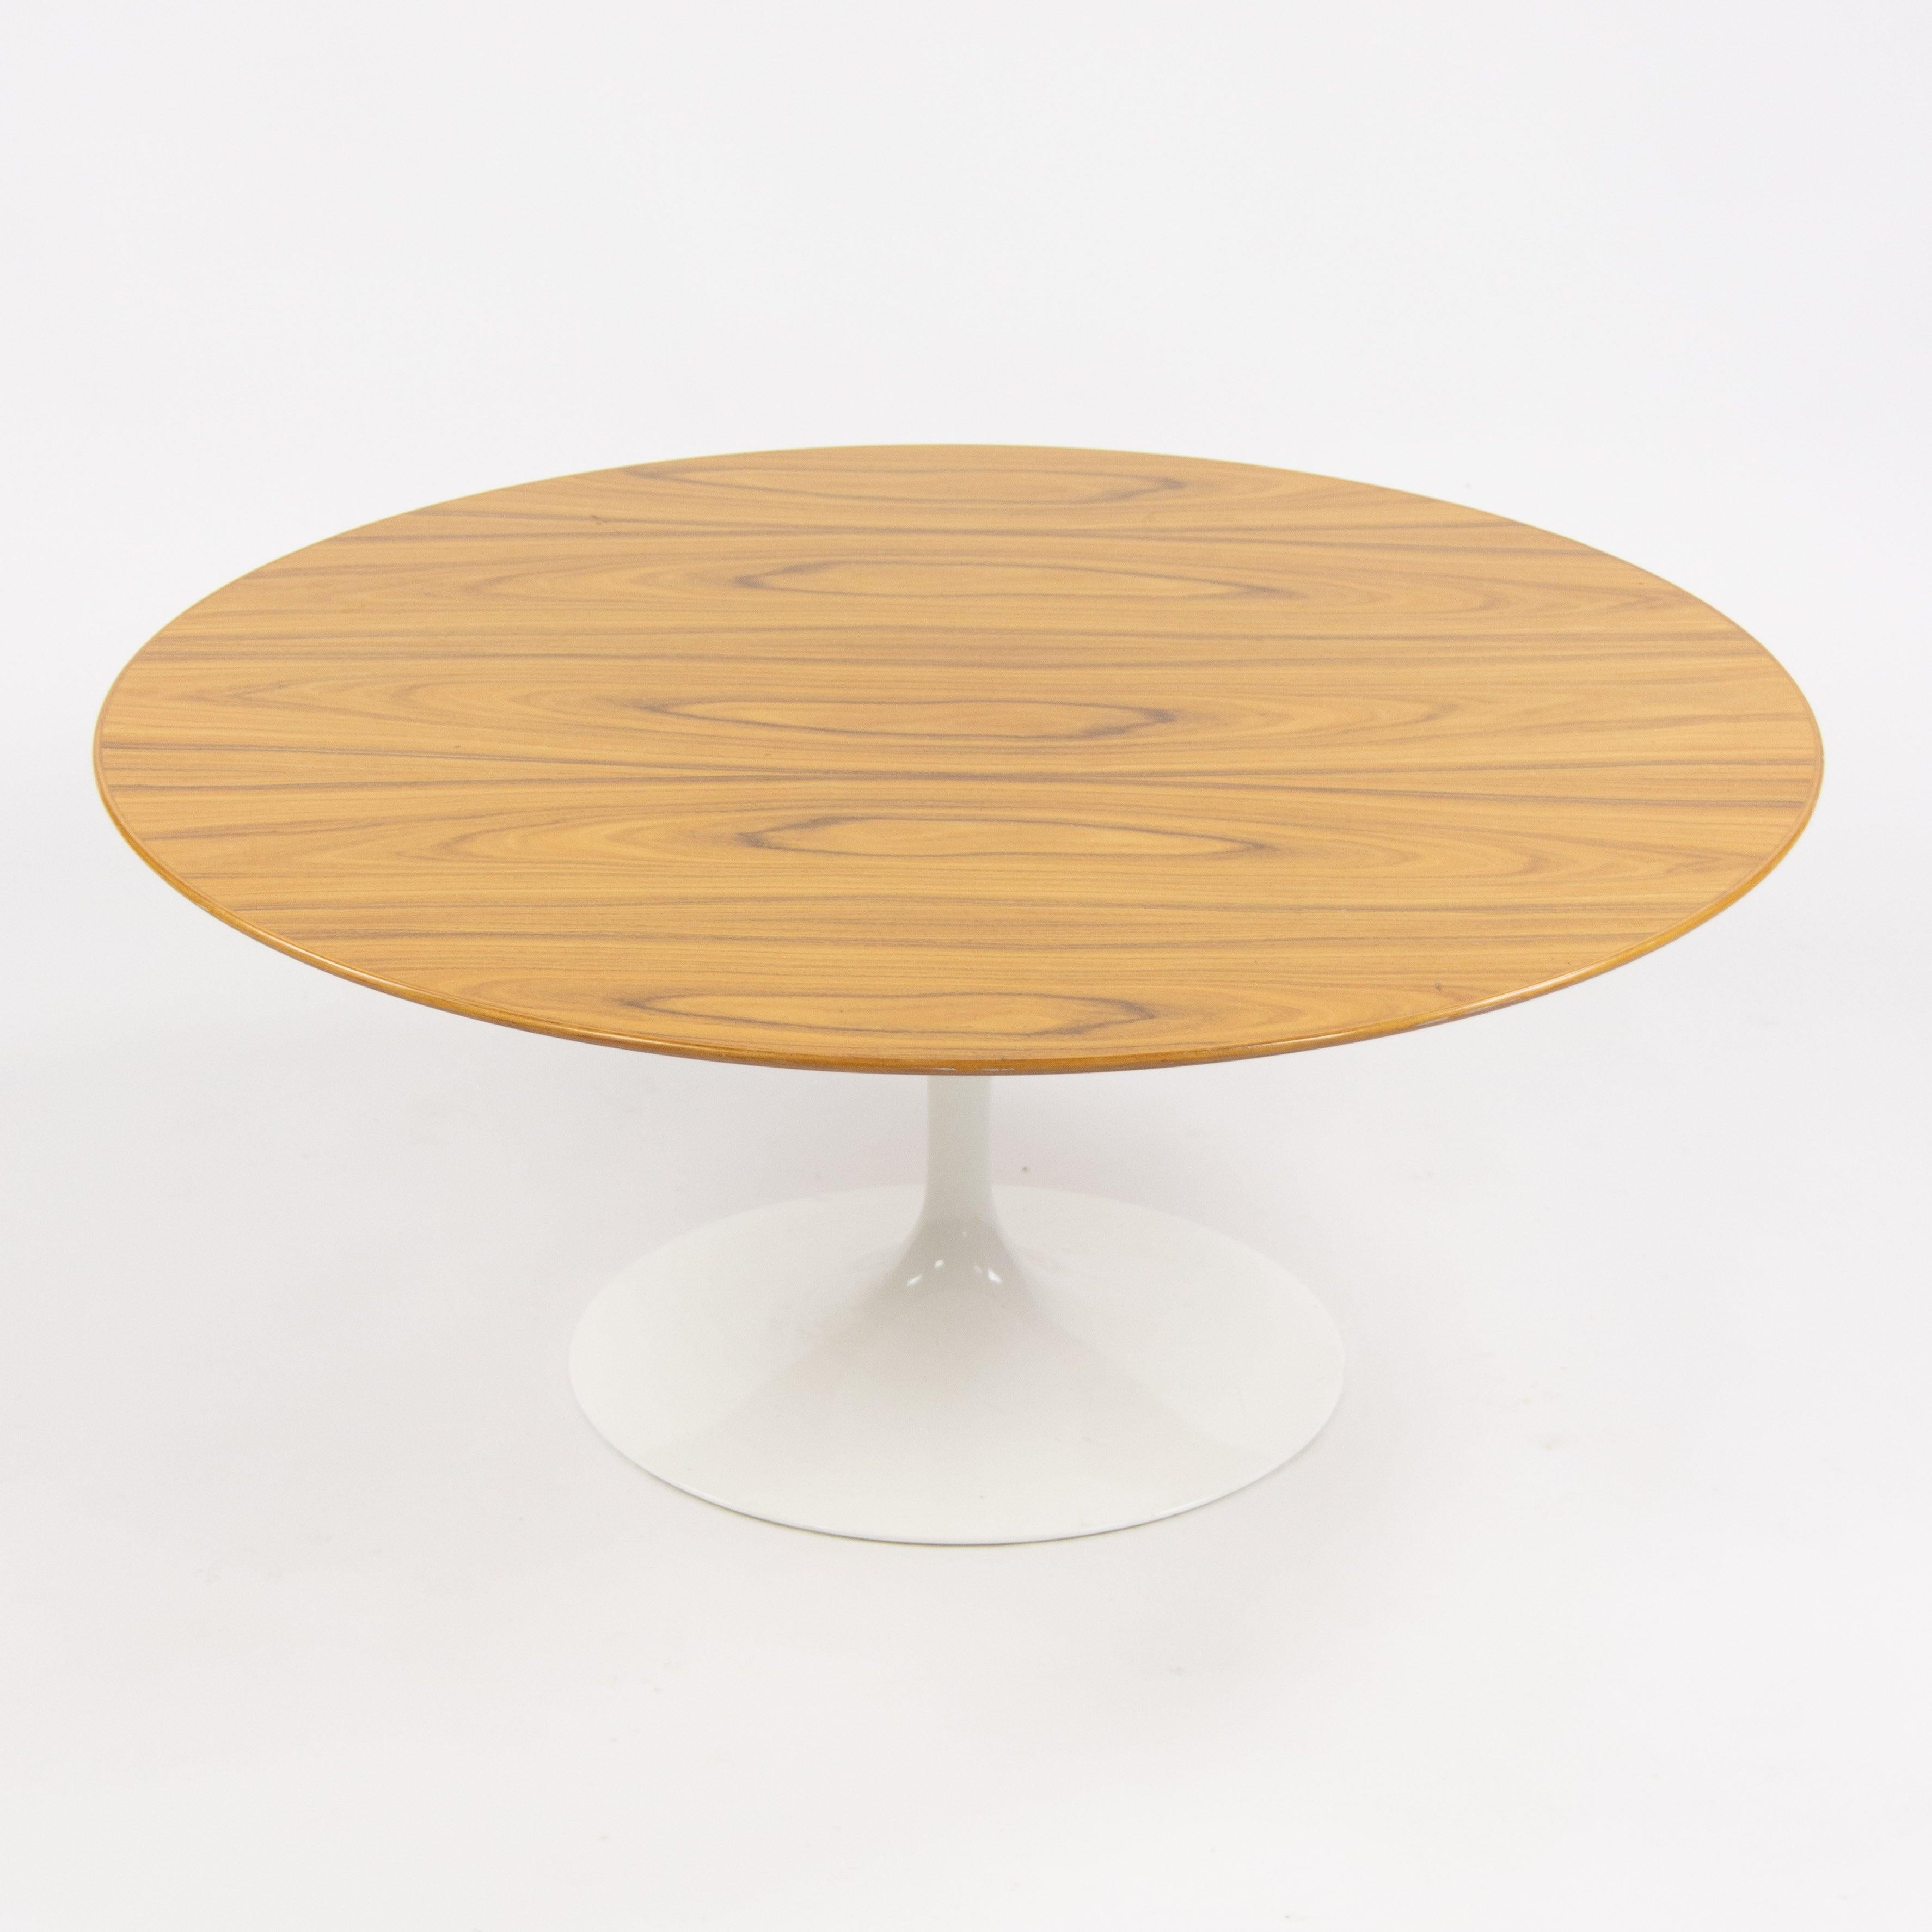 Listed for sale is one Knoll 35 inch Tulip Coffee Table, designed by Eero Saarinen.

This example has a white powder coated base with a gorgeous rosewood top. It is properly marked and guaranteed to be authentic.

The piece measures 35 inches in